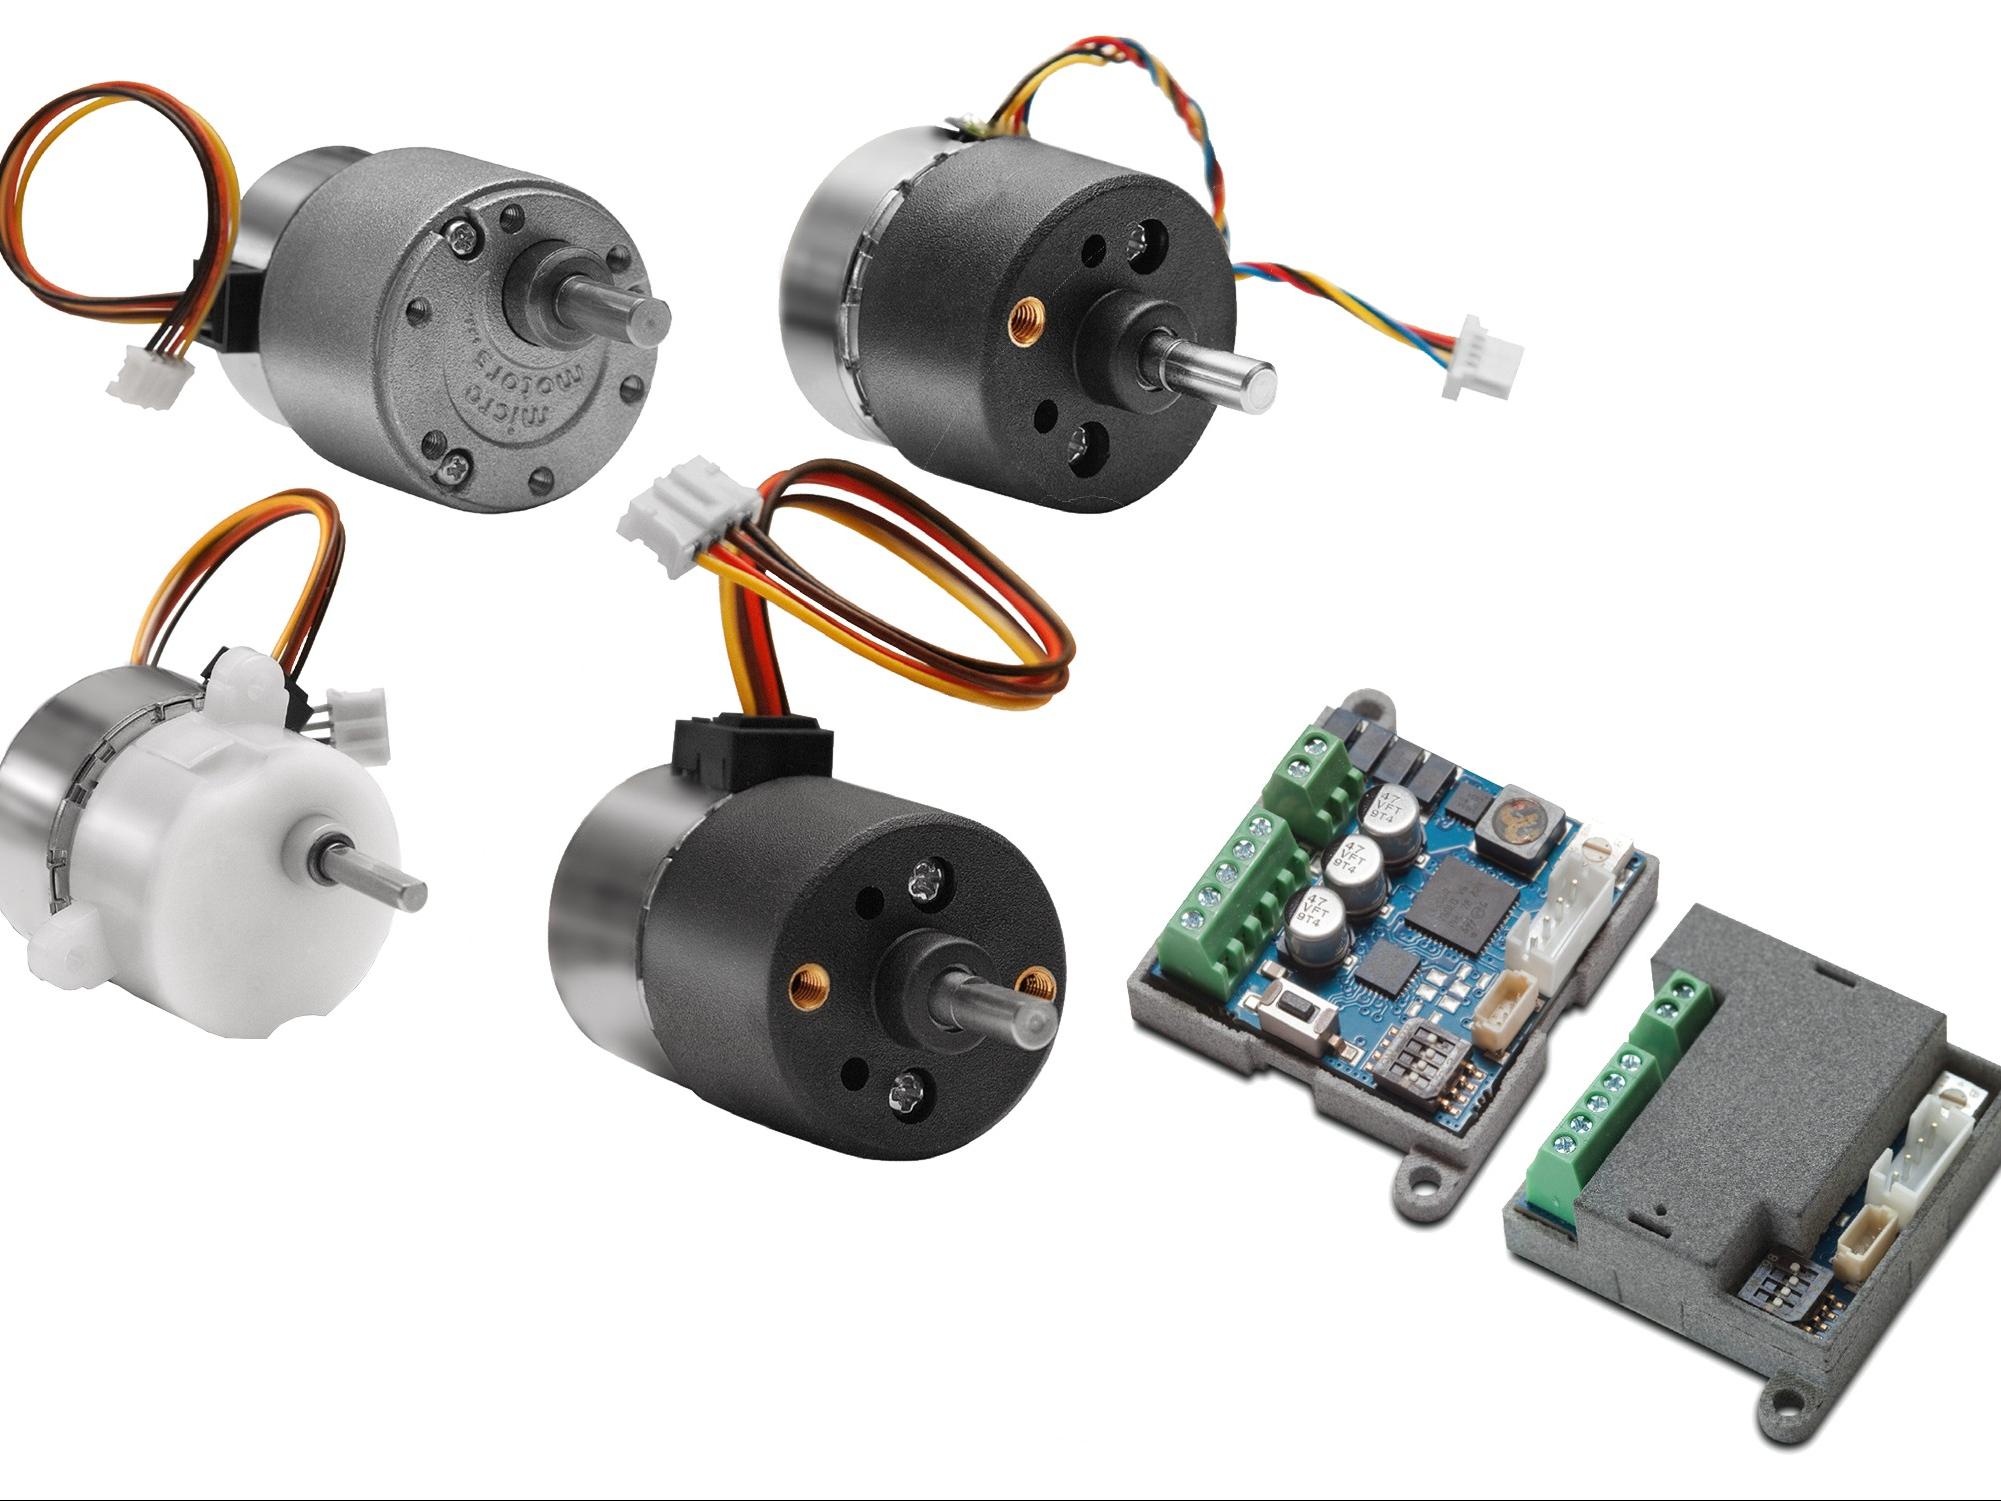 A step forward with stepper-gearmotors

